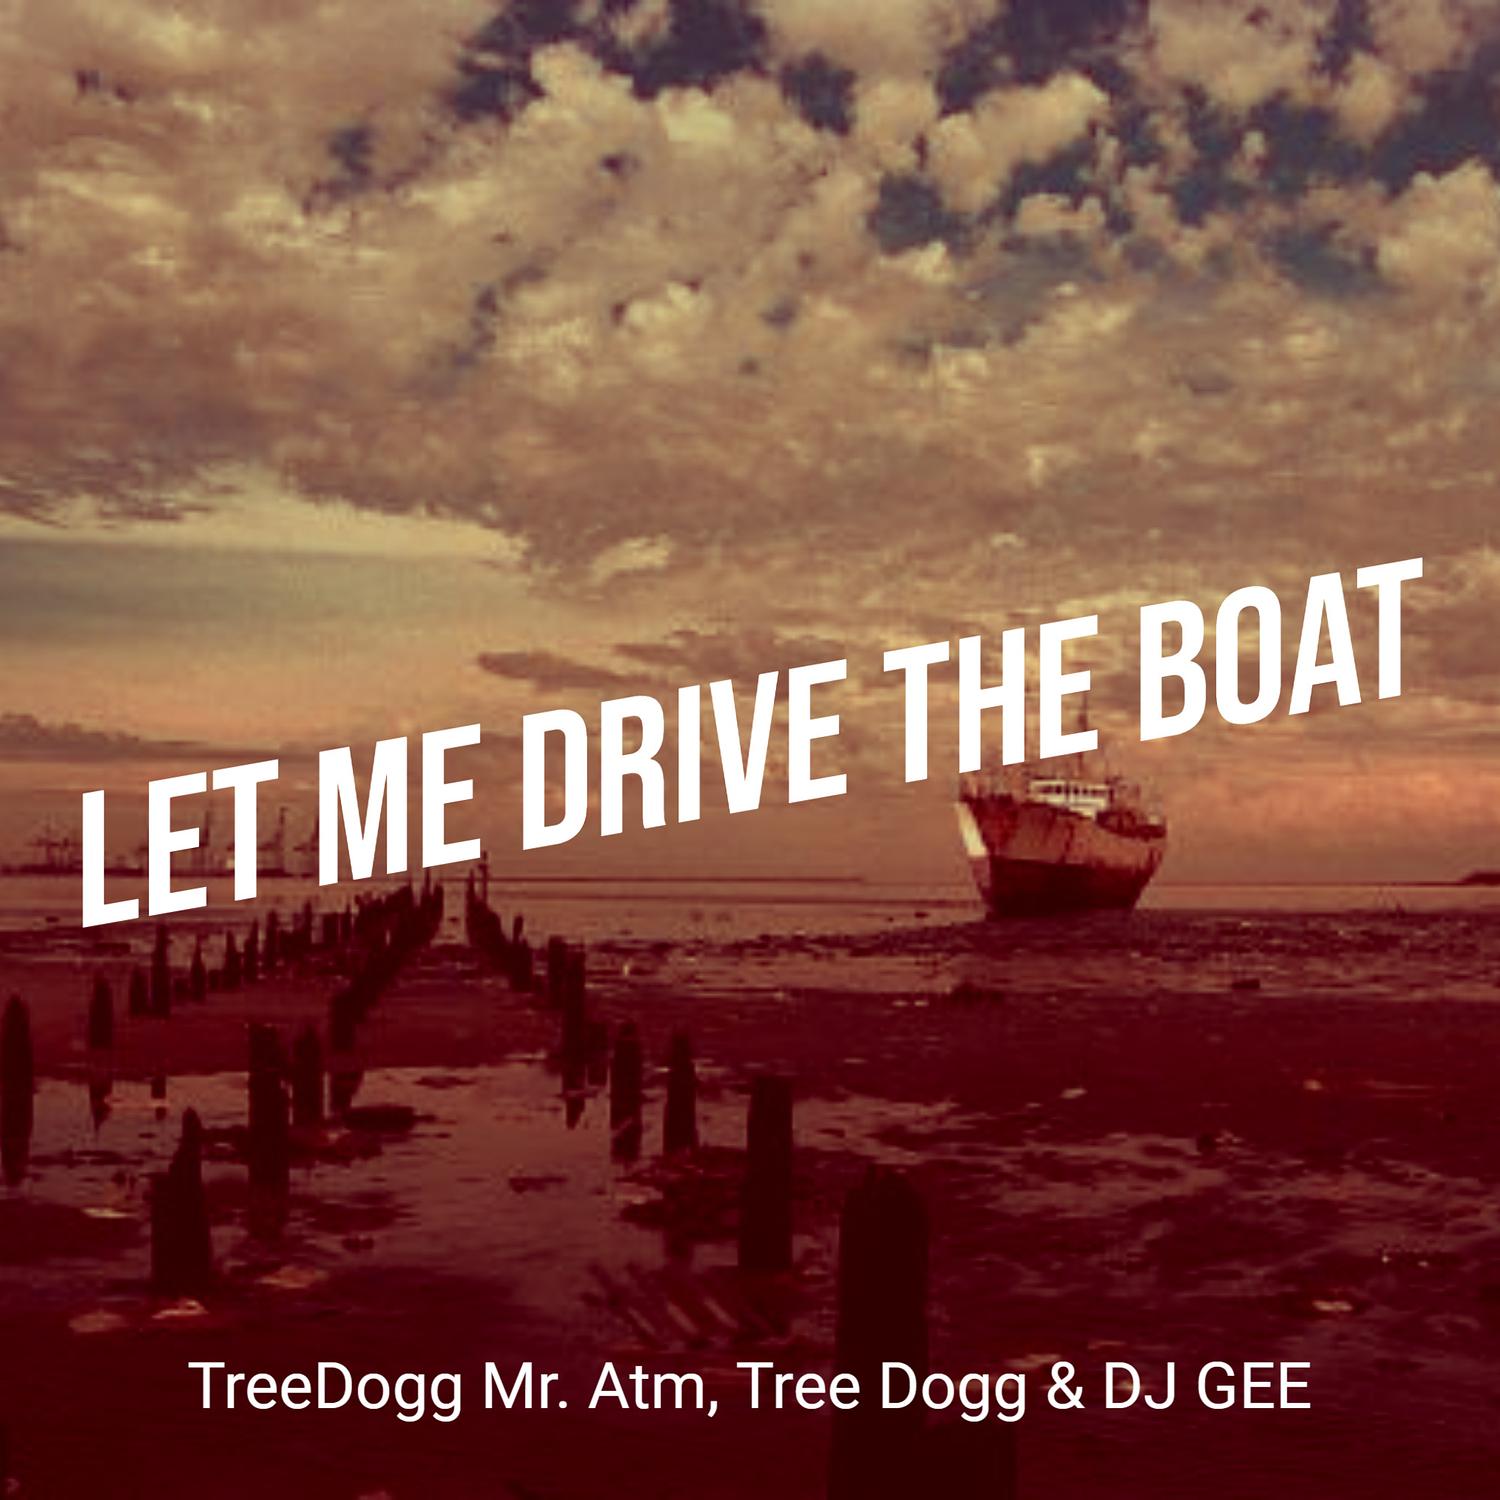 TreeDogg Mr. ATM - Let Me Drive the Boat